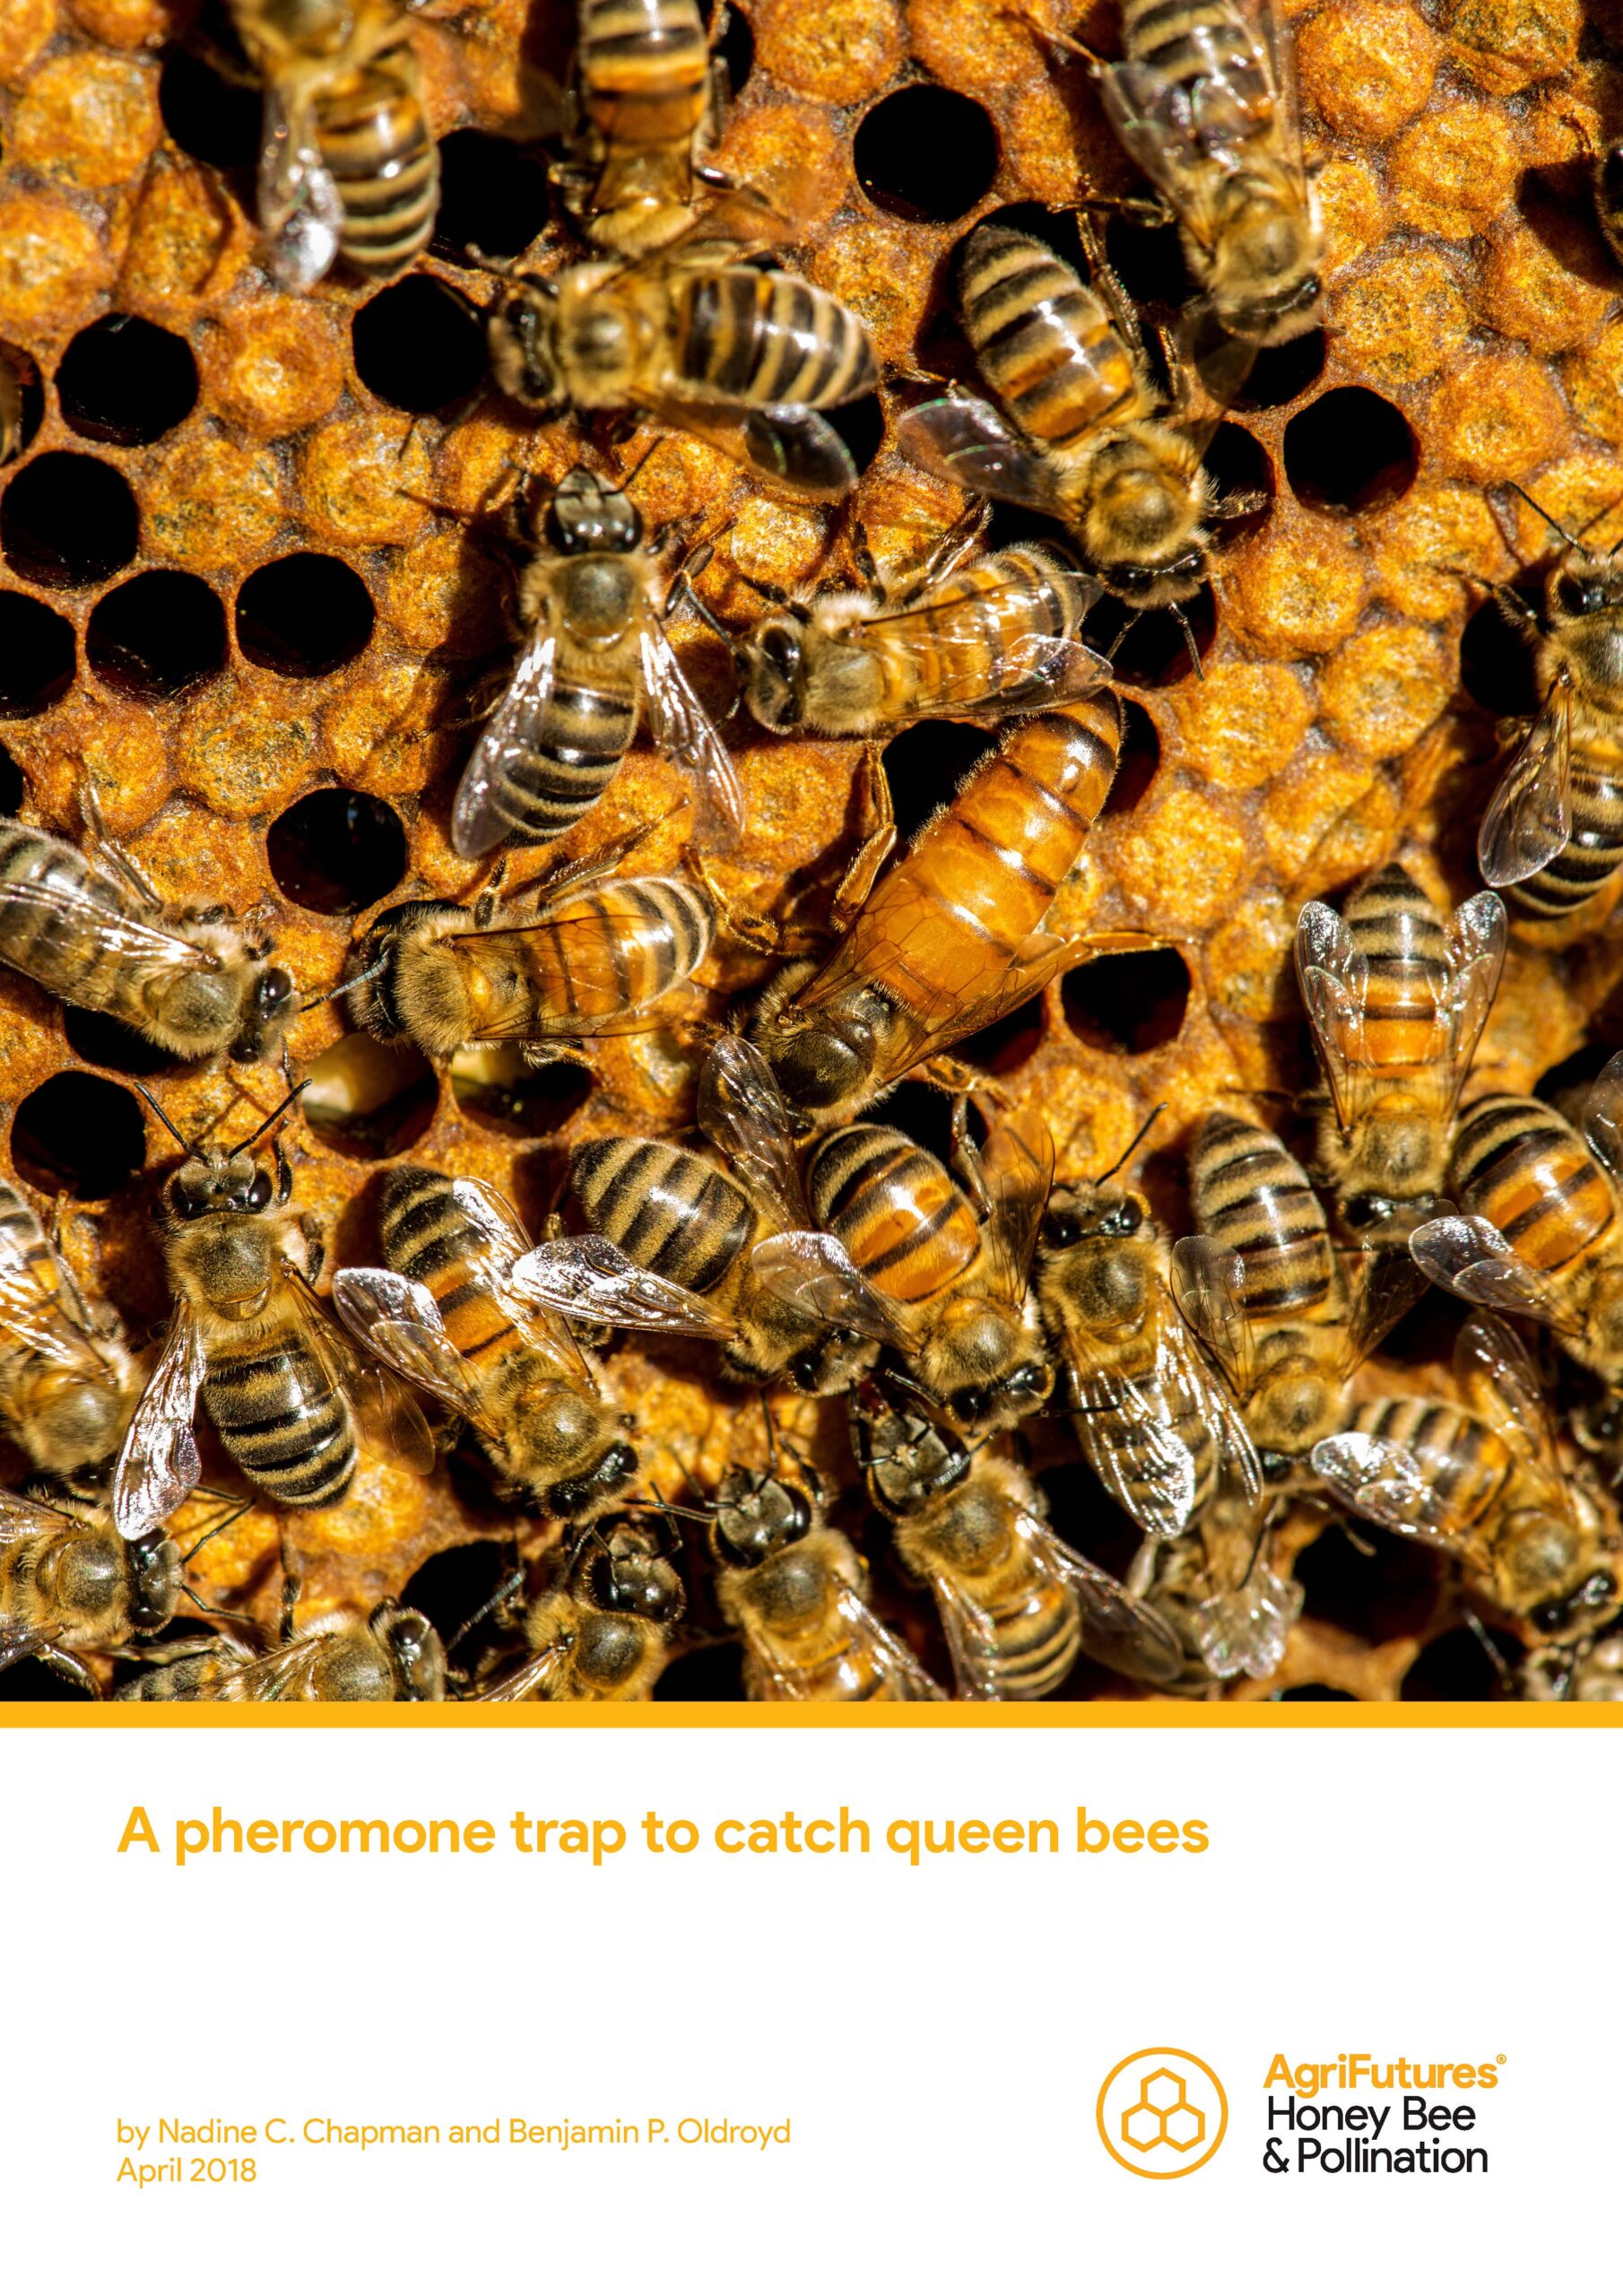 A pheromone trap to catch queen bees - image